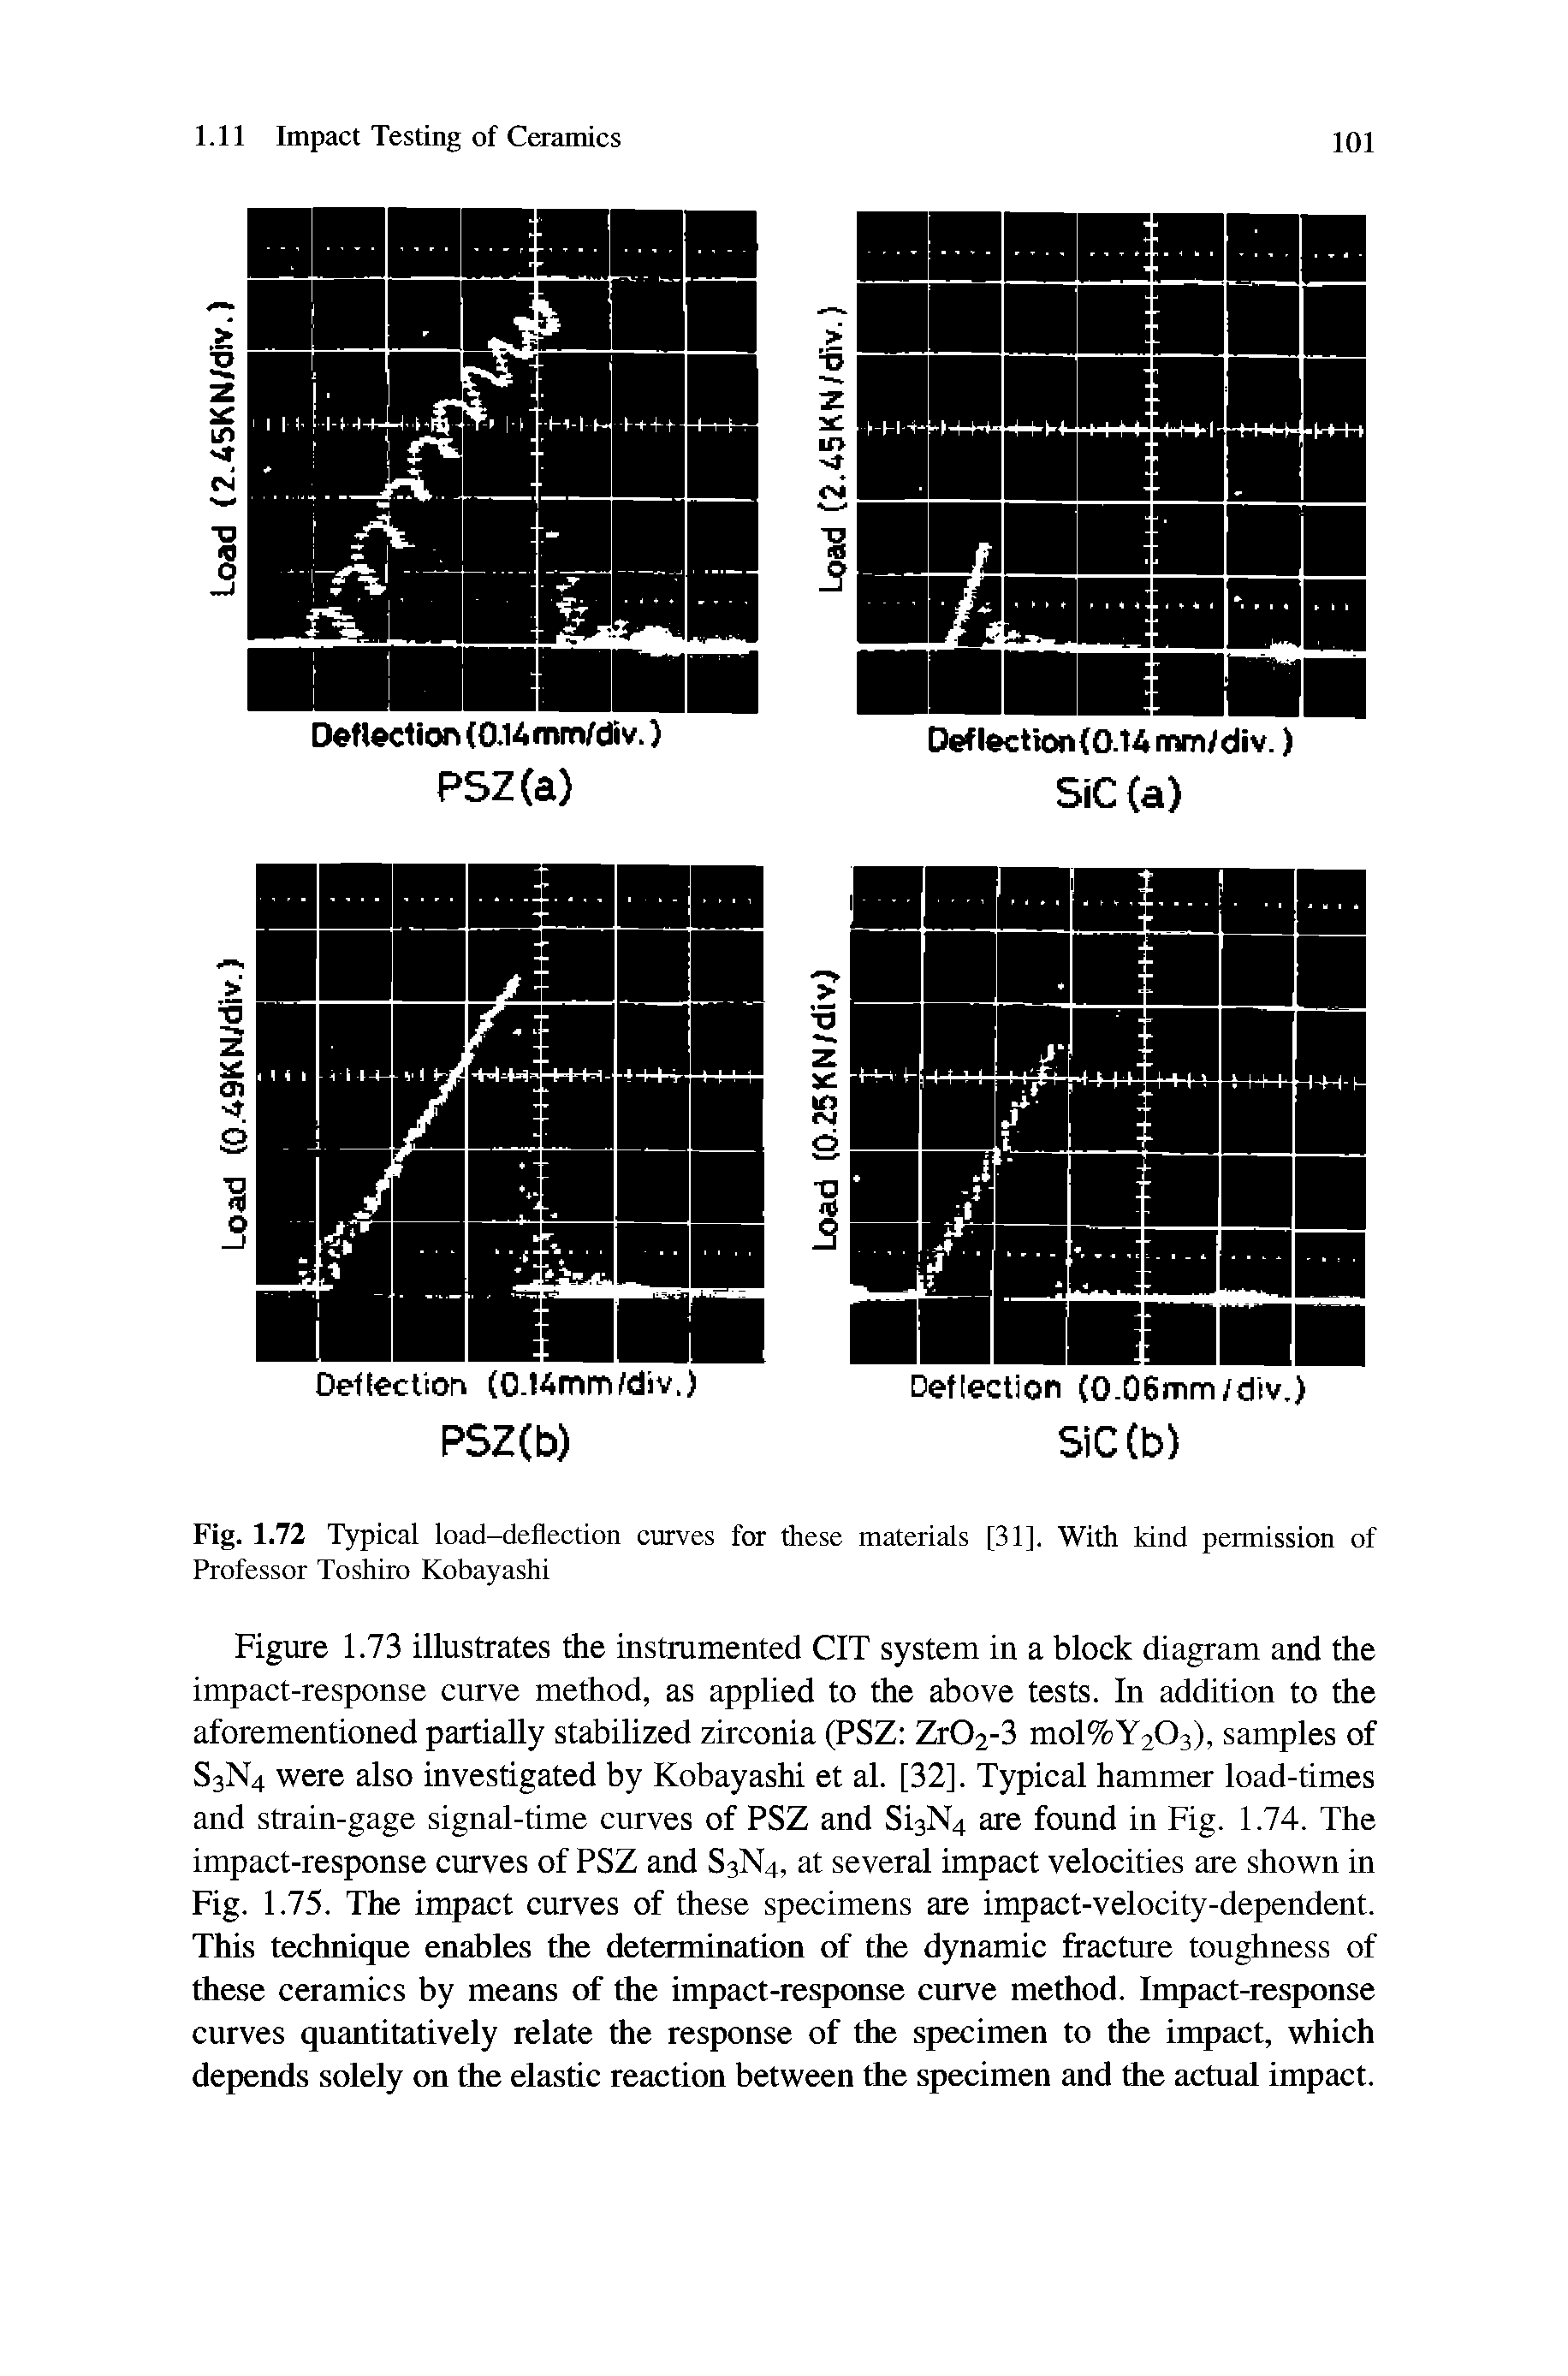 Figure 1.73 illustrates the instrumented CIT system in a block diagram and the impact-response curve method, as applied to the above tests. In addition to the aforementioned partially stabilized zirconia (PSZ ZrOi-S mol%Y203), samples of S3N4 were also investigated by Kobayashi et al. [32], Typical hammer load-times and strain-gage signal-time curves of PSZ and Si3N4 are found in Fig. 1.74. The impact-response curves of PSZ and S3N4, at several impact velocities are shown in Fig. 1.75. The impact curves of these specimens are impact-velocity-dependent. This technique enables the determination of the dynamic fracture toughness of these ceramics by means of the impact-response curve method. Impact-response curves quantitatively relate the response of the specimen to the impact, which depends solely on the elastic reaction between the specimen and the actual impact.